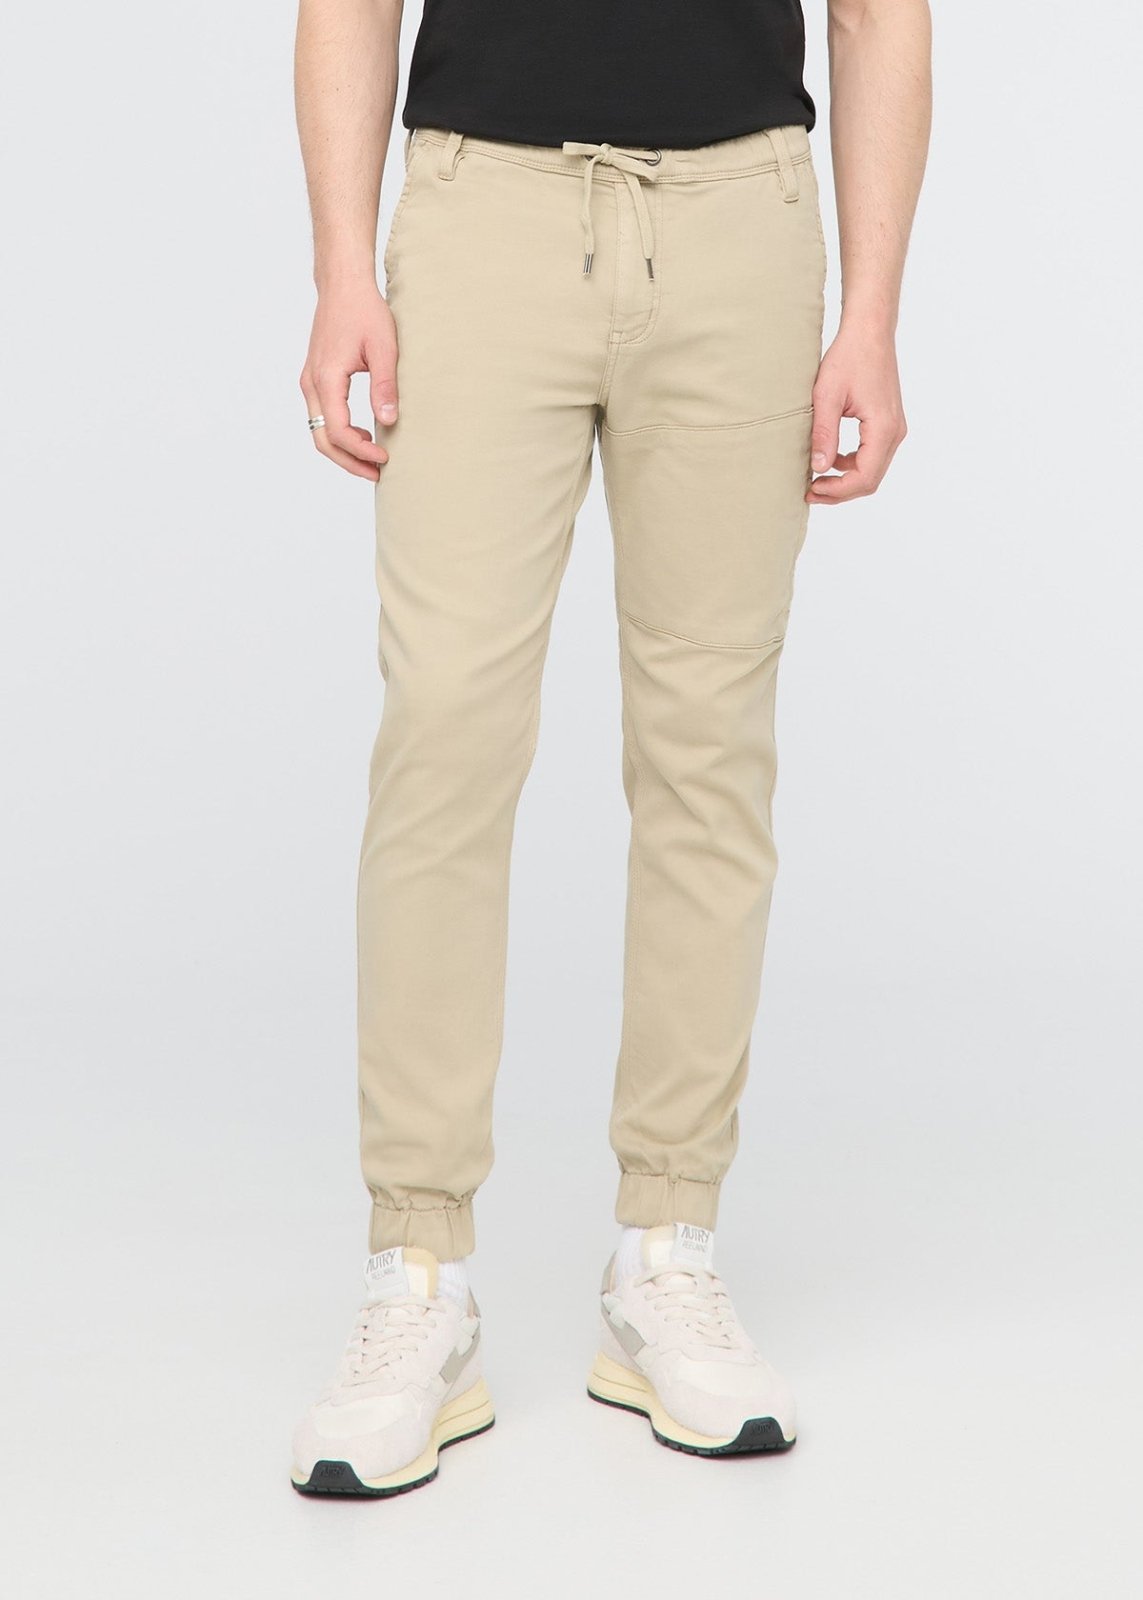 mens off-white athletic jogger front